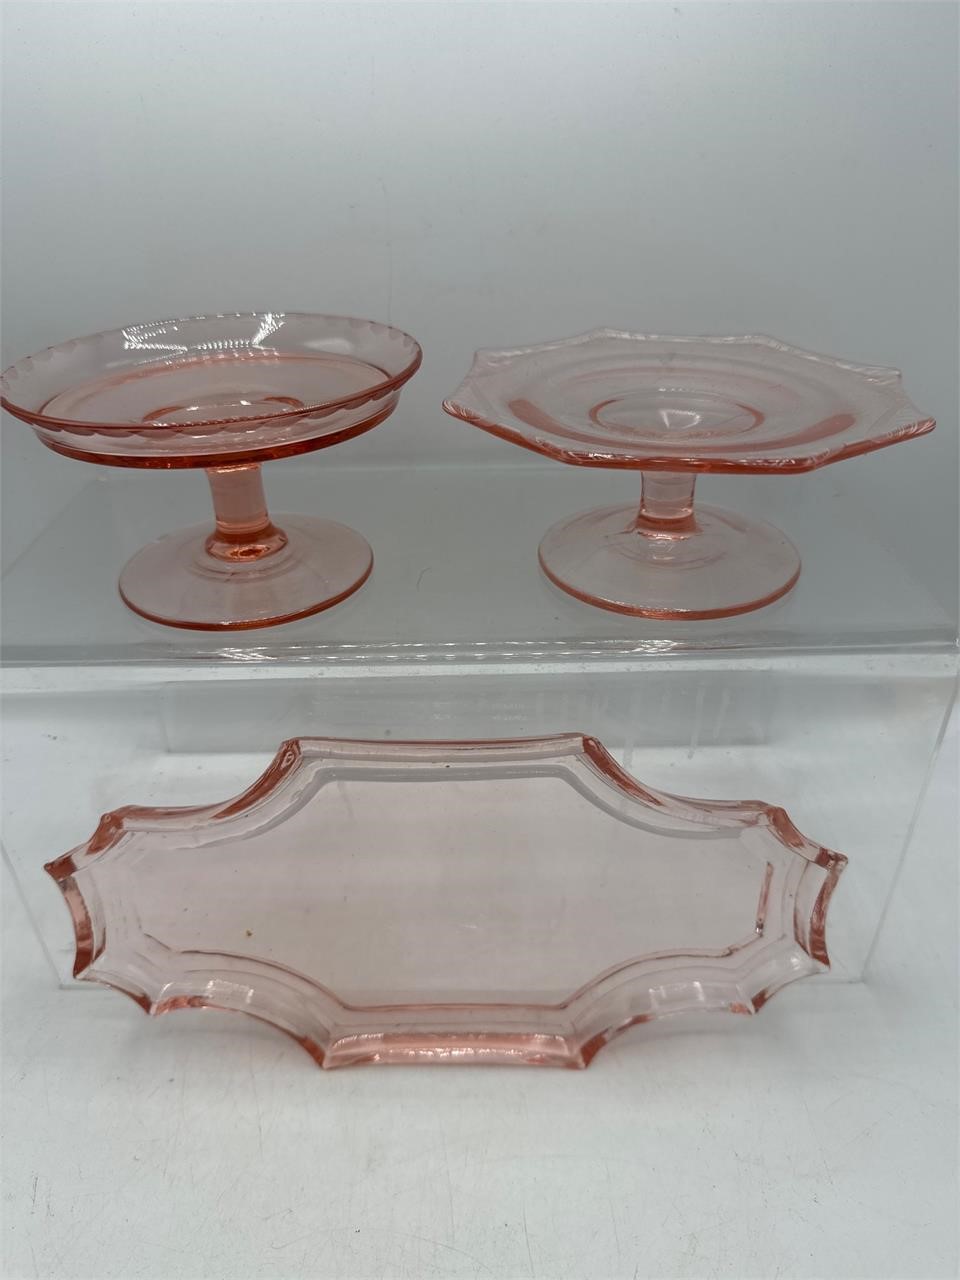 Pink depression glass dresser tray and compotes